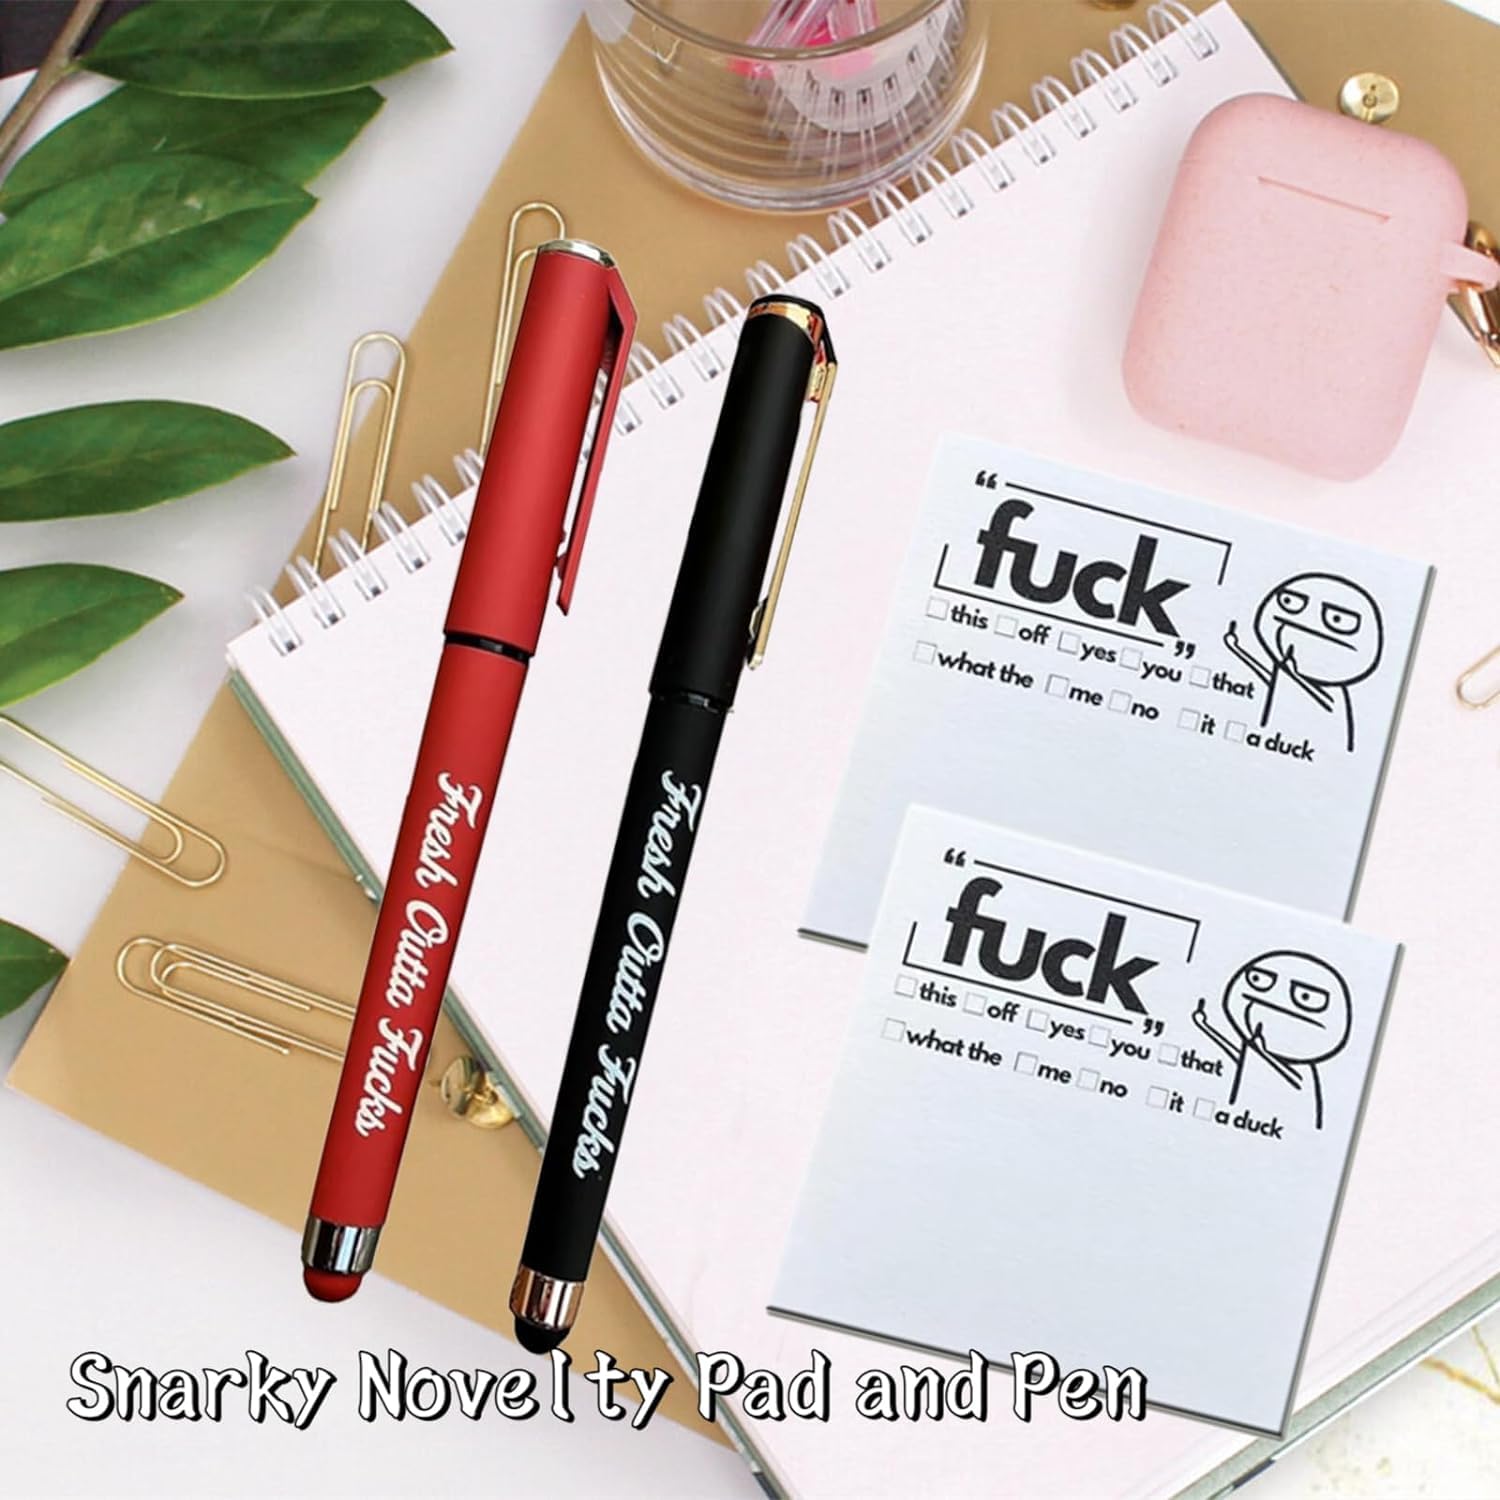 Fresh Outta Fucks Pad and Pen,Funny Sticky Notes Office Supplies,Desk Accessories for Friends Funny Christmas Gifts for Men Women (BlackandRed)